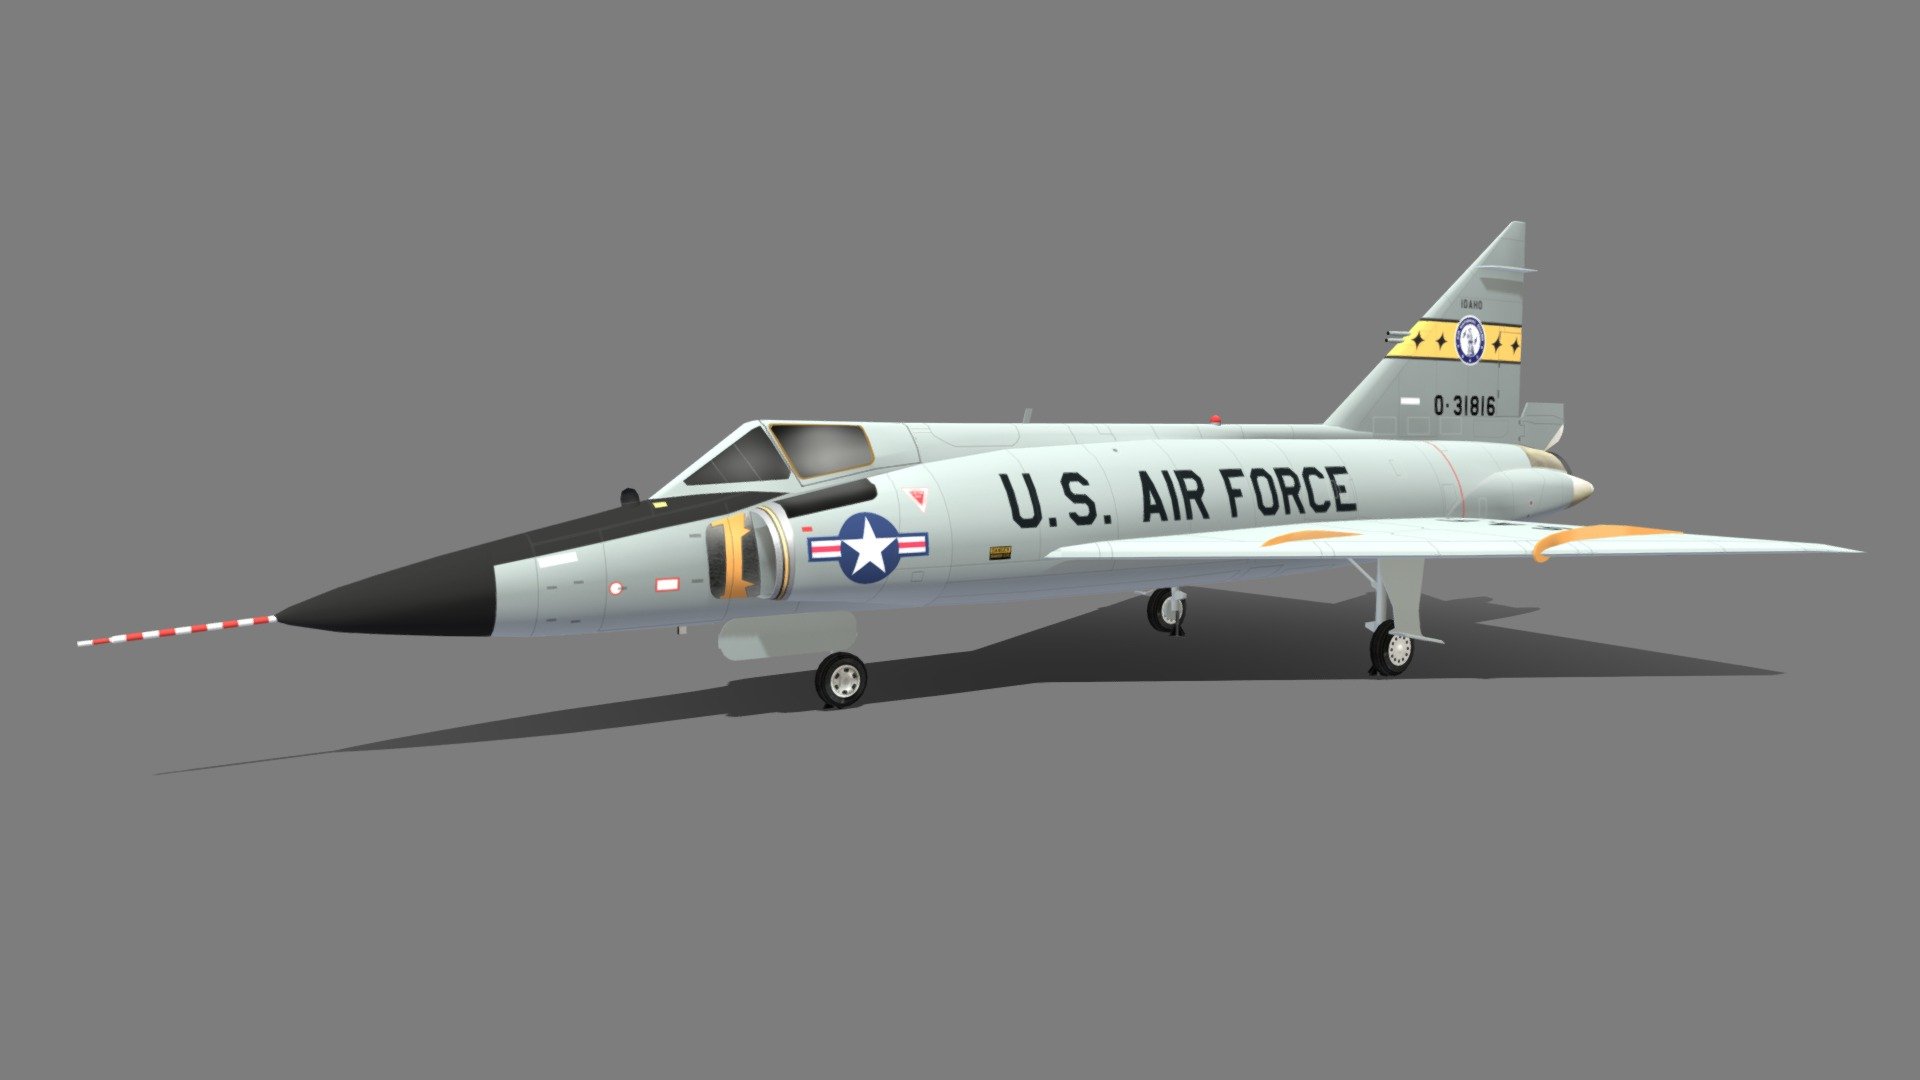 was an interceptor aircraft designed and produced by the American aircraft manufacturer Convair. A member of the Century Series, the F-102 was the first operational supersonic interceptor and delta-wing fighter operated by the United States Air Force (USAF). The F-102 was designed in response to a requirement, known as the 1954 Ultimate Interceptor, produced by USAF officials during the late 1940s. 

this is a static, non rigged, non animated, Lowpoly mesh, blank layered 2048 psd template layered texture, for MSFS or XPlane Scenery Airport development , standard materials, enough detailed just to be seen as part of an scene without consuming GPU resources

thanks for looking! dont forget to check my other models - Convair F102 Delta Dart Low Poly Static - Buy Royalty Free 3D model by Hangarcerouno 3d model